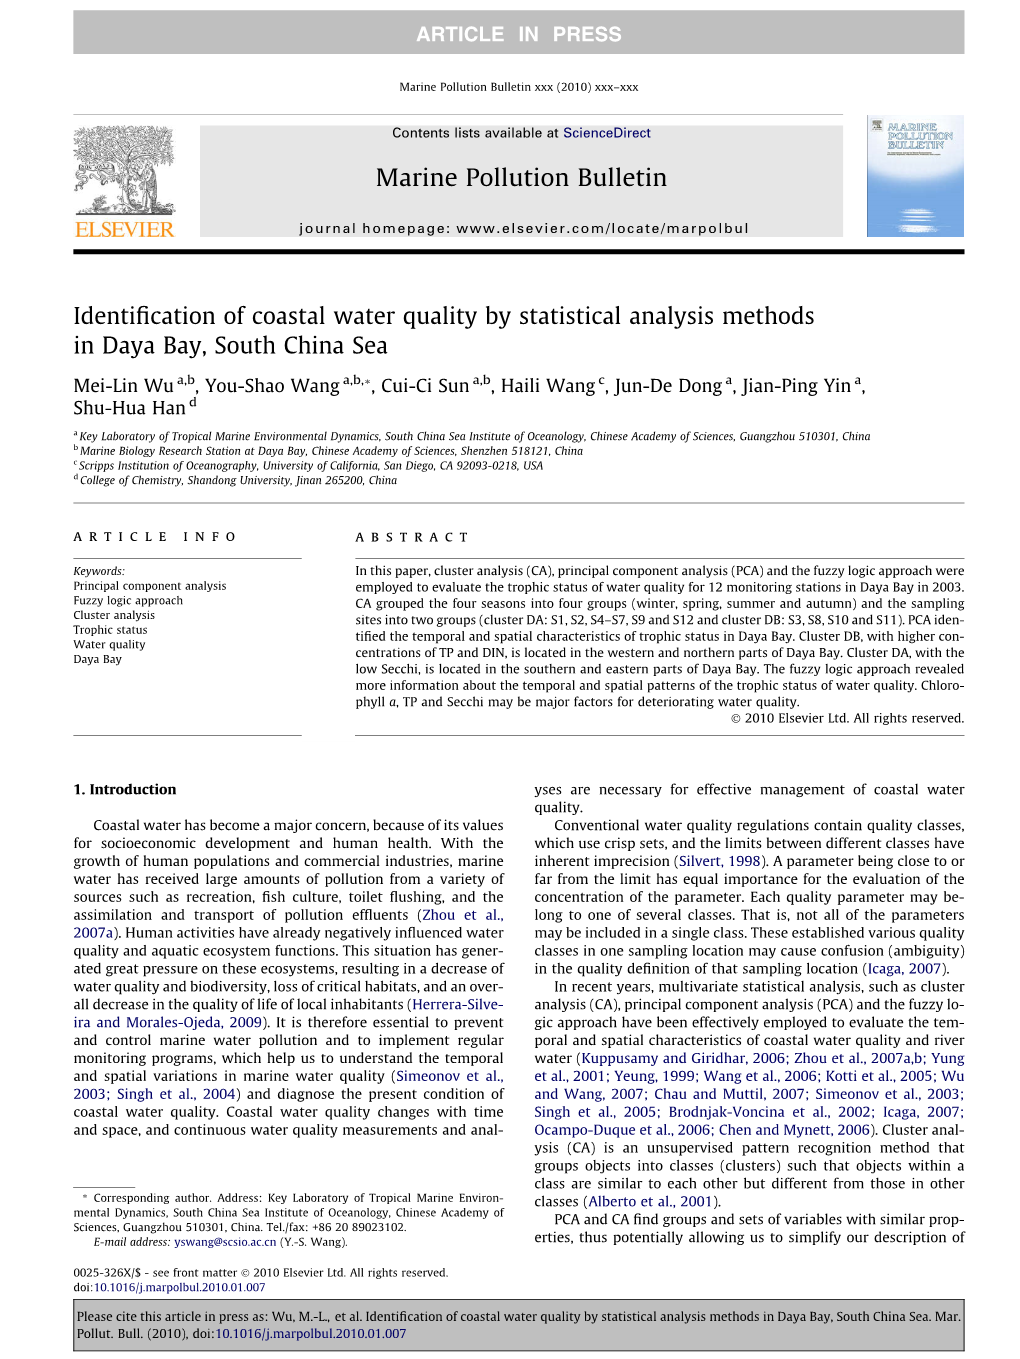 Identification of Coastal Water Quality by Statistical Analysis Methods in Daya Bay, South China